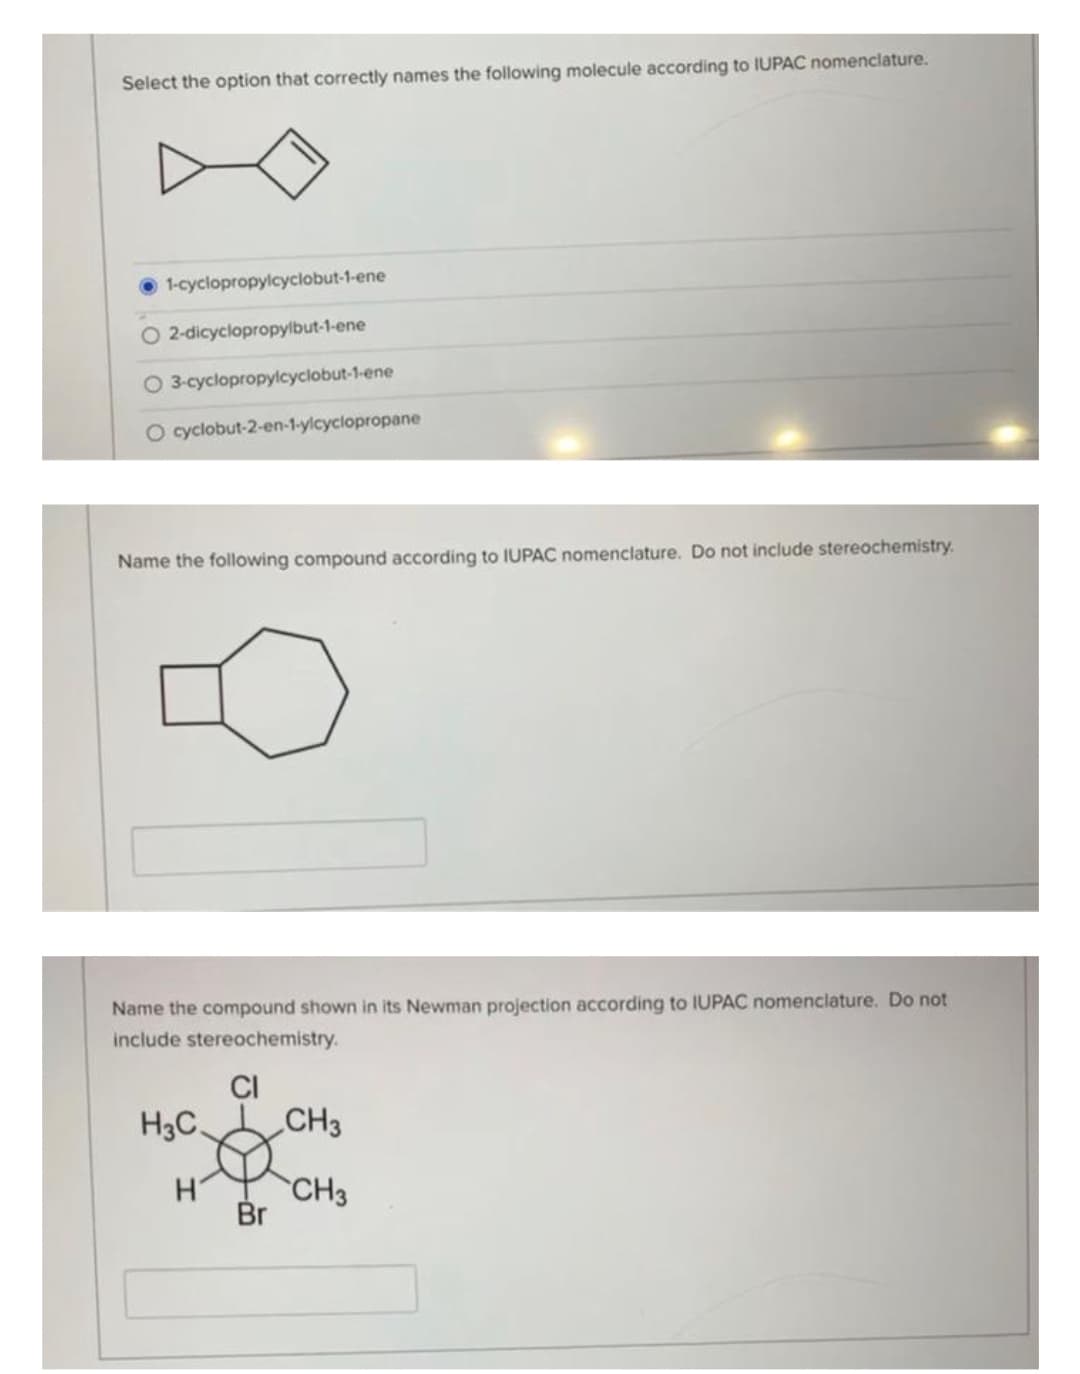 Select the option that correctly names the following molecule according to IUPAC nomenclature.
1-cyclopropylcyclobut-1-ene
O2-dicyclopropylbut-1-ene
3-cyclopropylcyclobut-1-ene
O cyclobut-2-en-1-ylcyclopropane
Name the following compound according to IUPAC nomenclature. Do not include stereochemistry.
Name the compound shown in its Newman projection according to IUPAC nomenclature. Do not
include stereochemistry.
CI
H3C.
H
Br
CH3
CH3